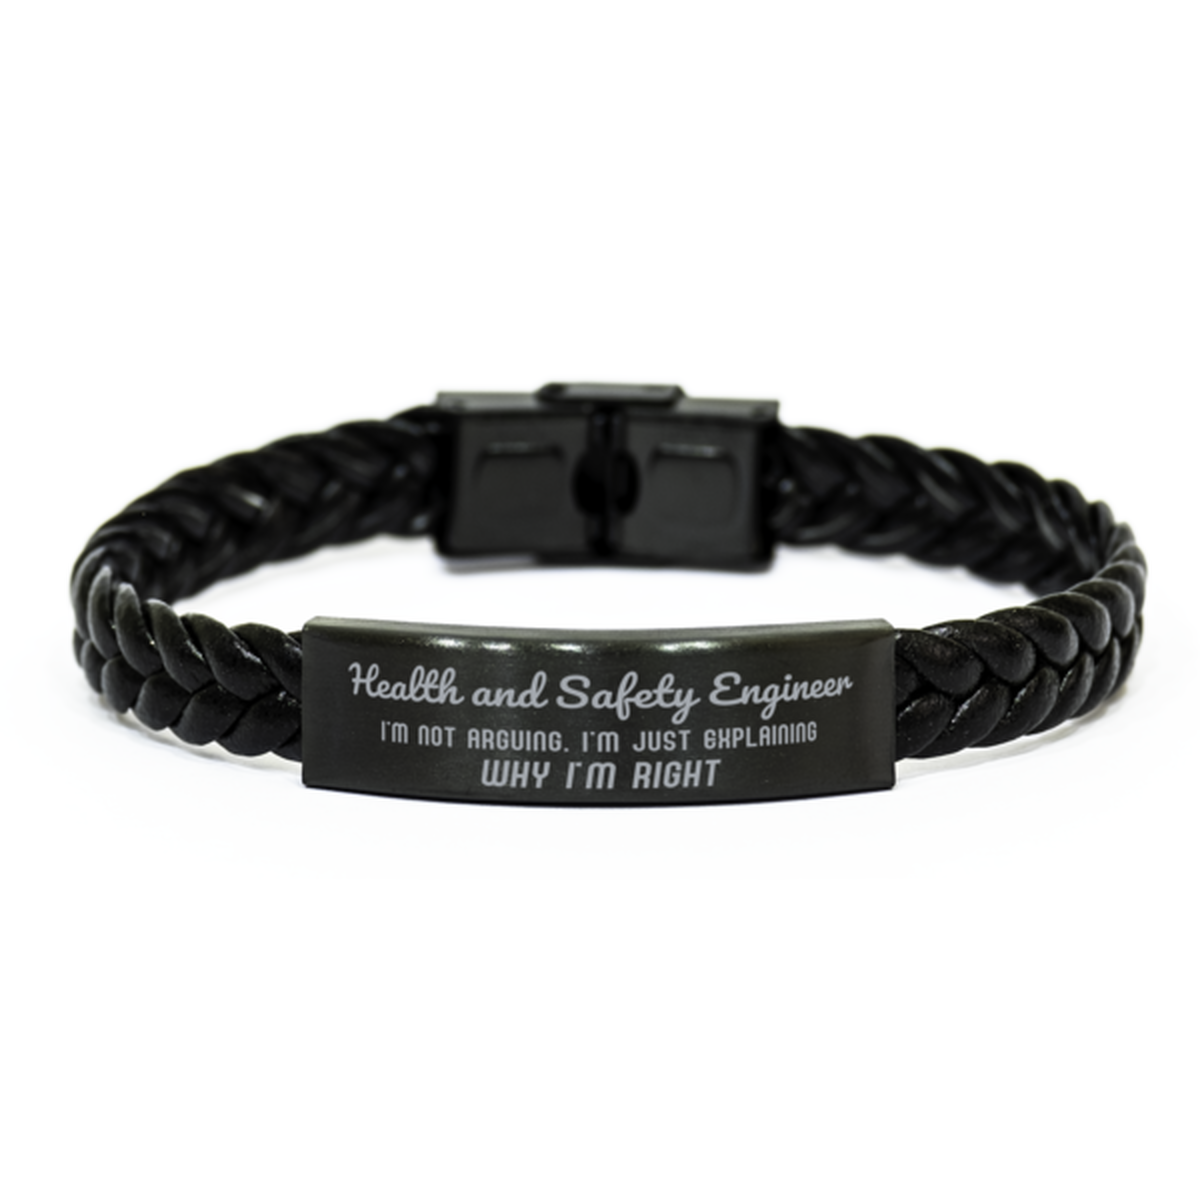 Health and Safety Engineer I'm not Arguing. I'm Just Explaining Why I'm RIGHT Braided Leather Bracelet, Graduation Birthday Christmas Health and Safety Engineer Gifts For Health and Safety Engineer Funny Saying Quote Present for Men Women Coworker